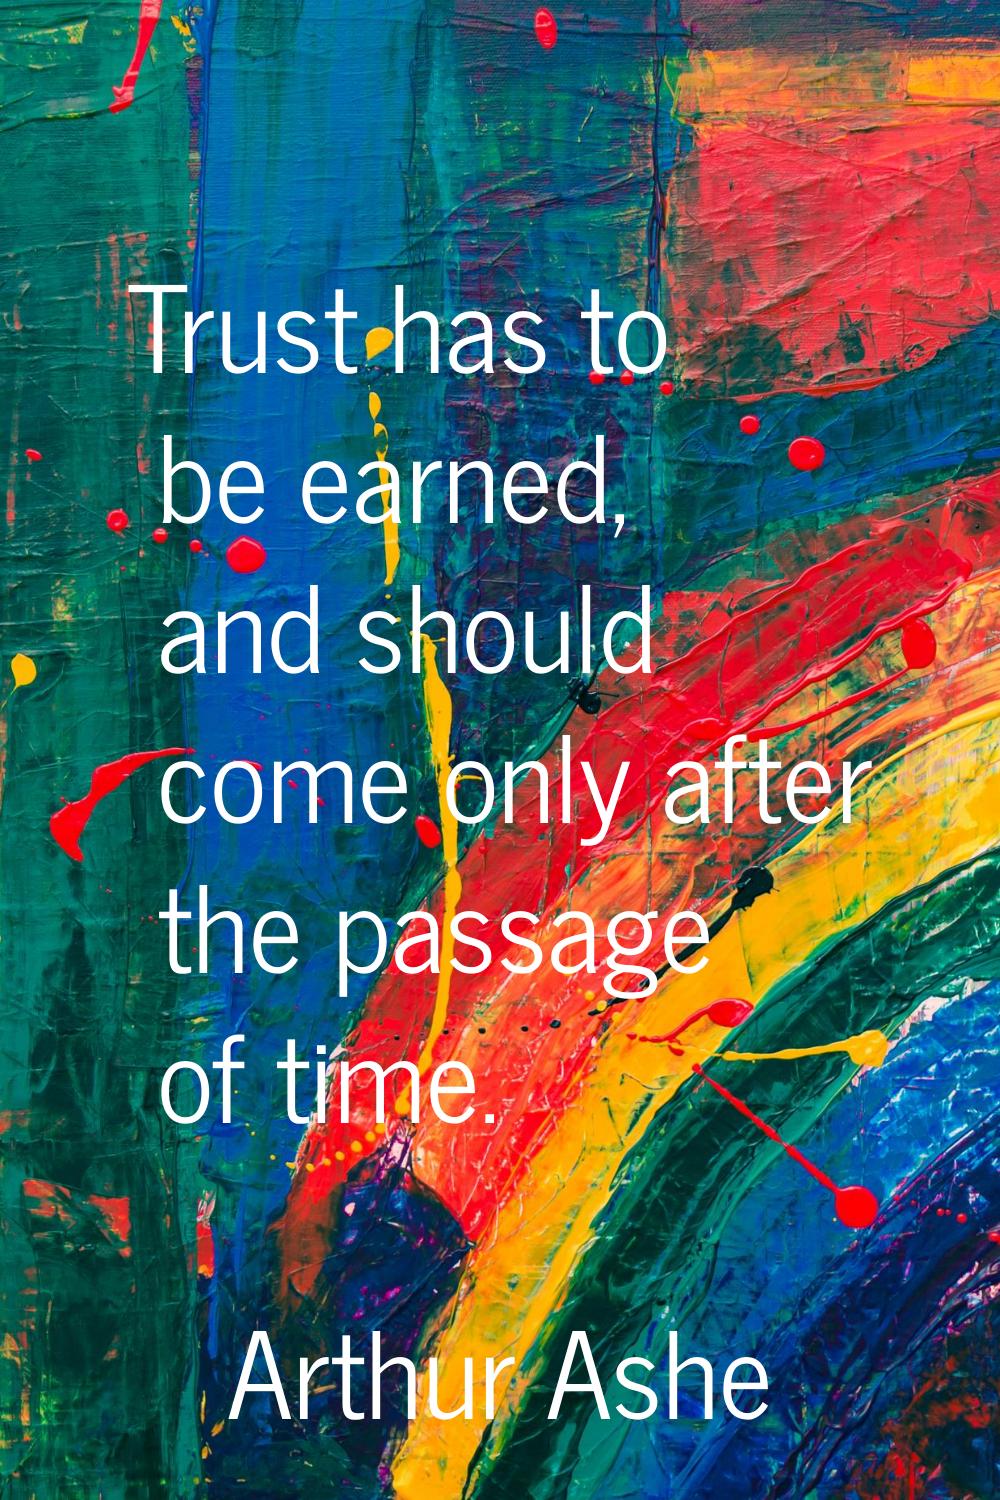 Trust has to be earned, and should come only after the passage of time.